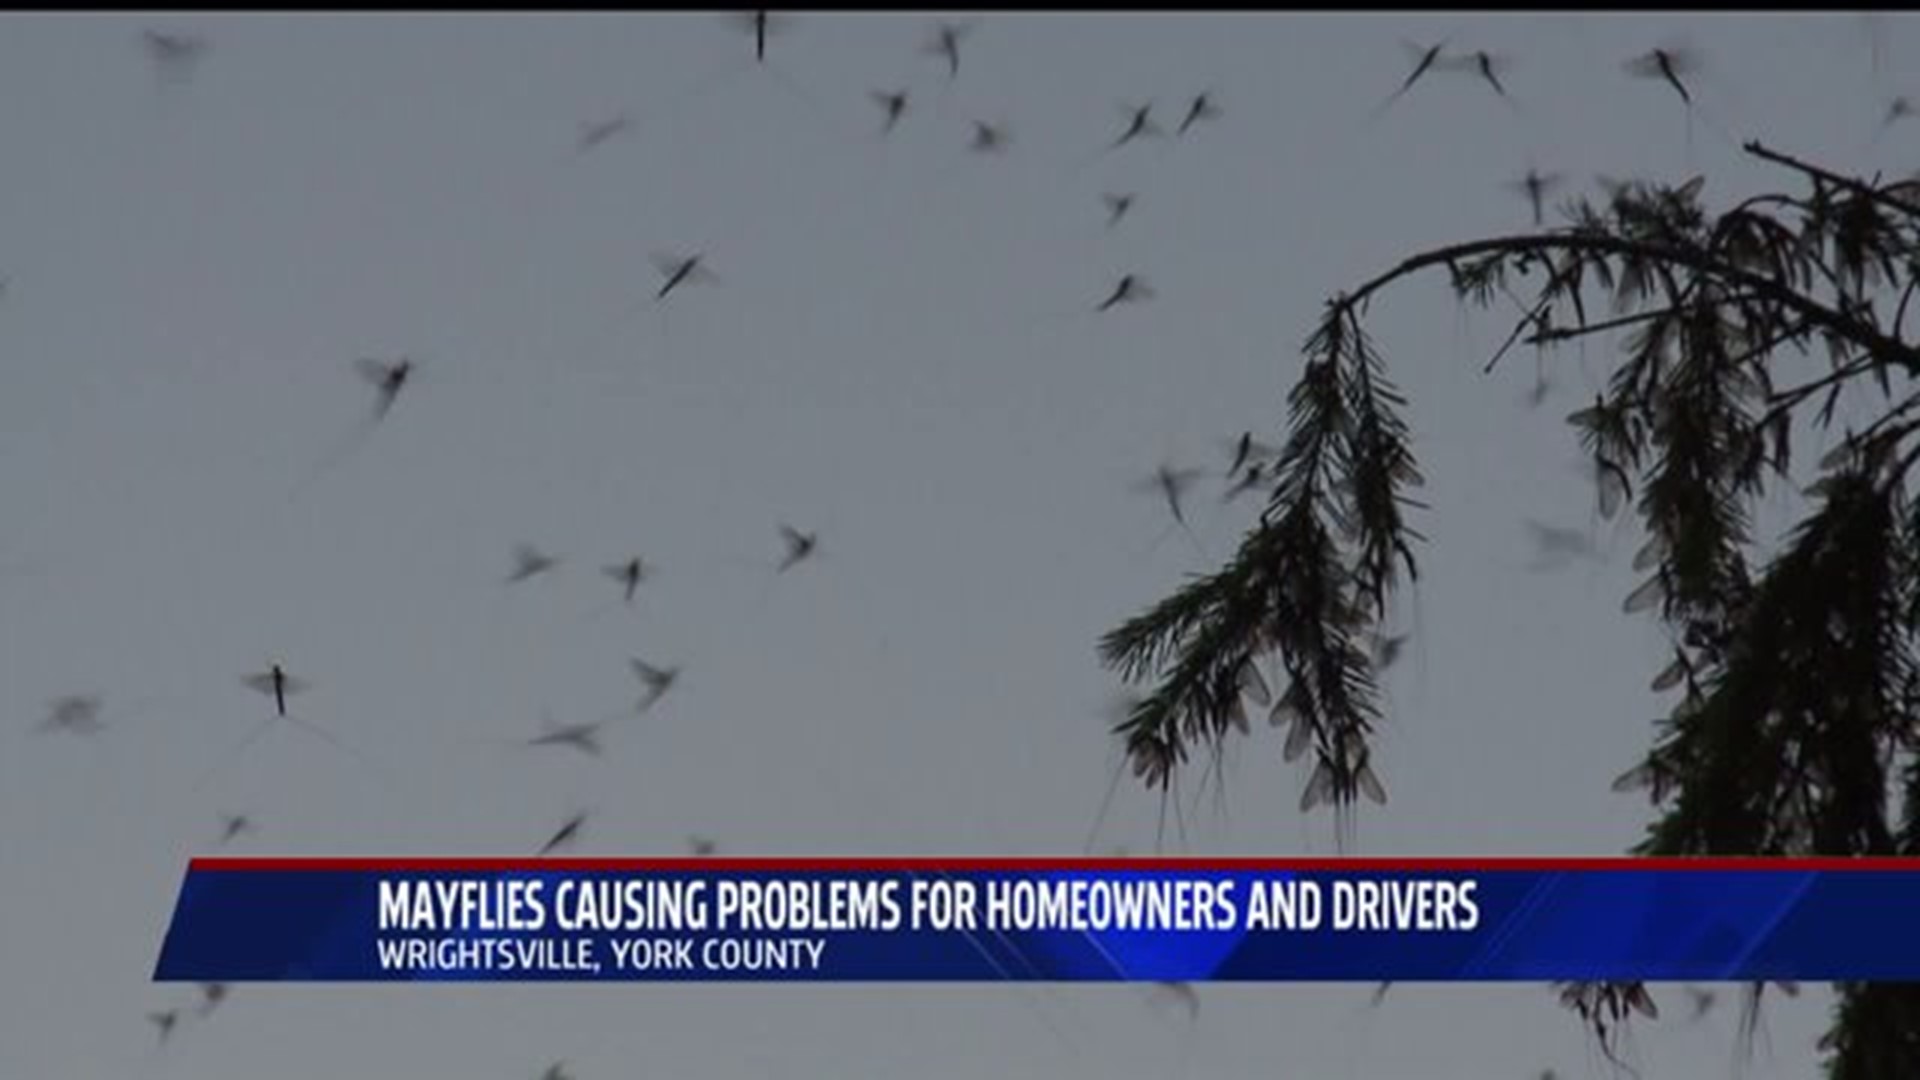 Mayflies in York Co. creating problems for drivers and homeowners